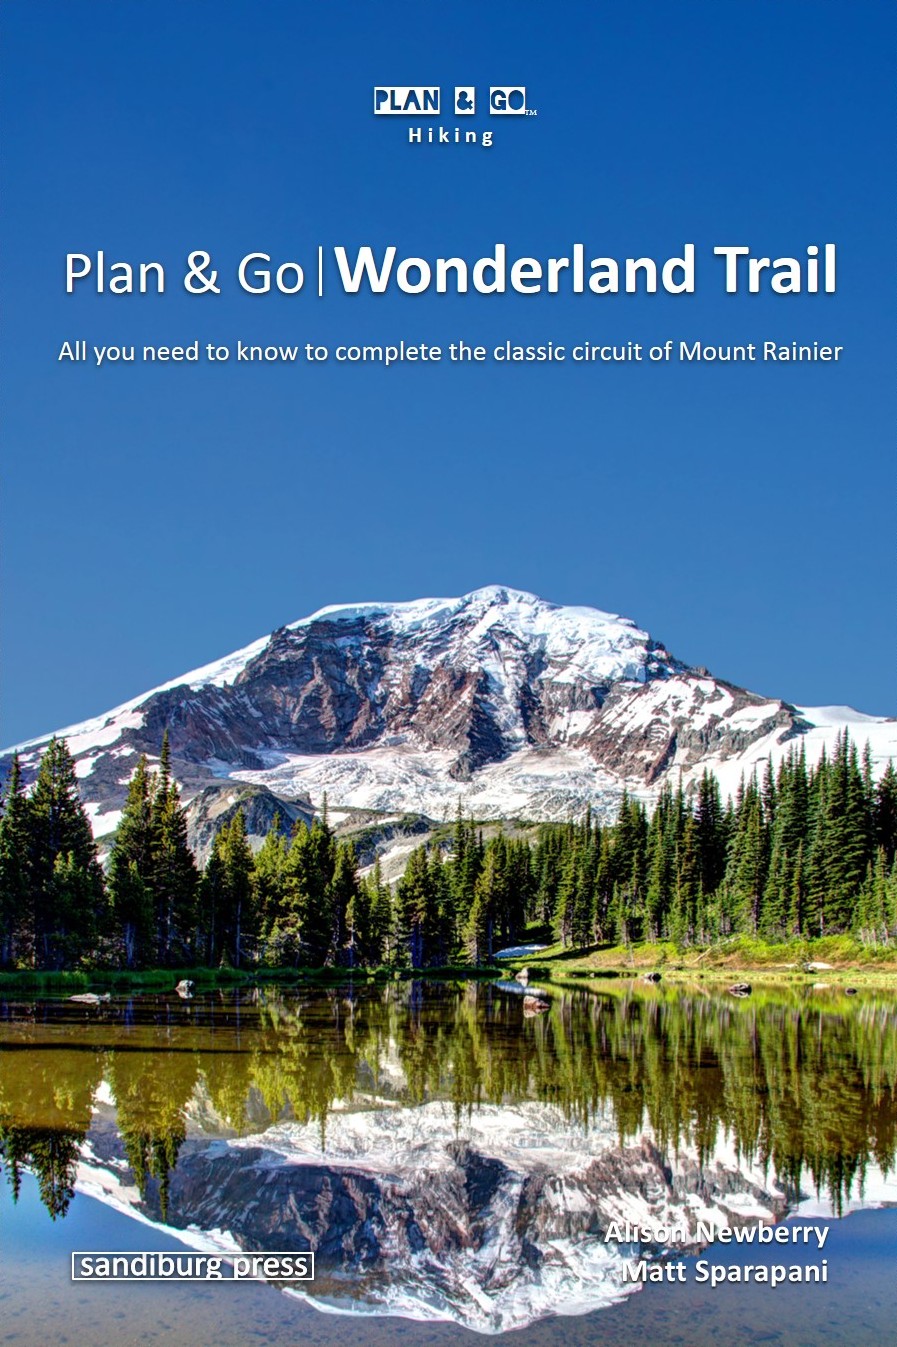 All you need to know to complete the classic circuit of Mount Rainier